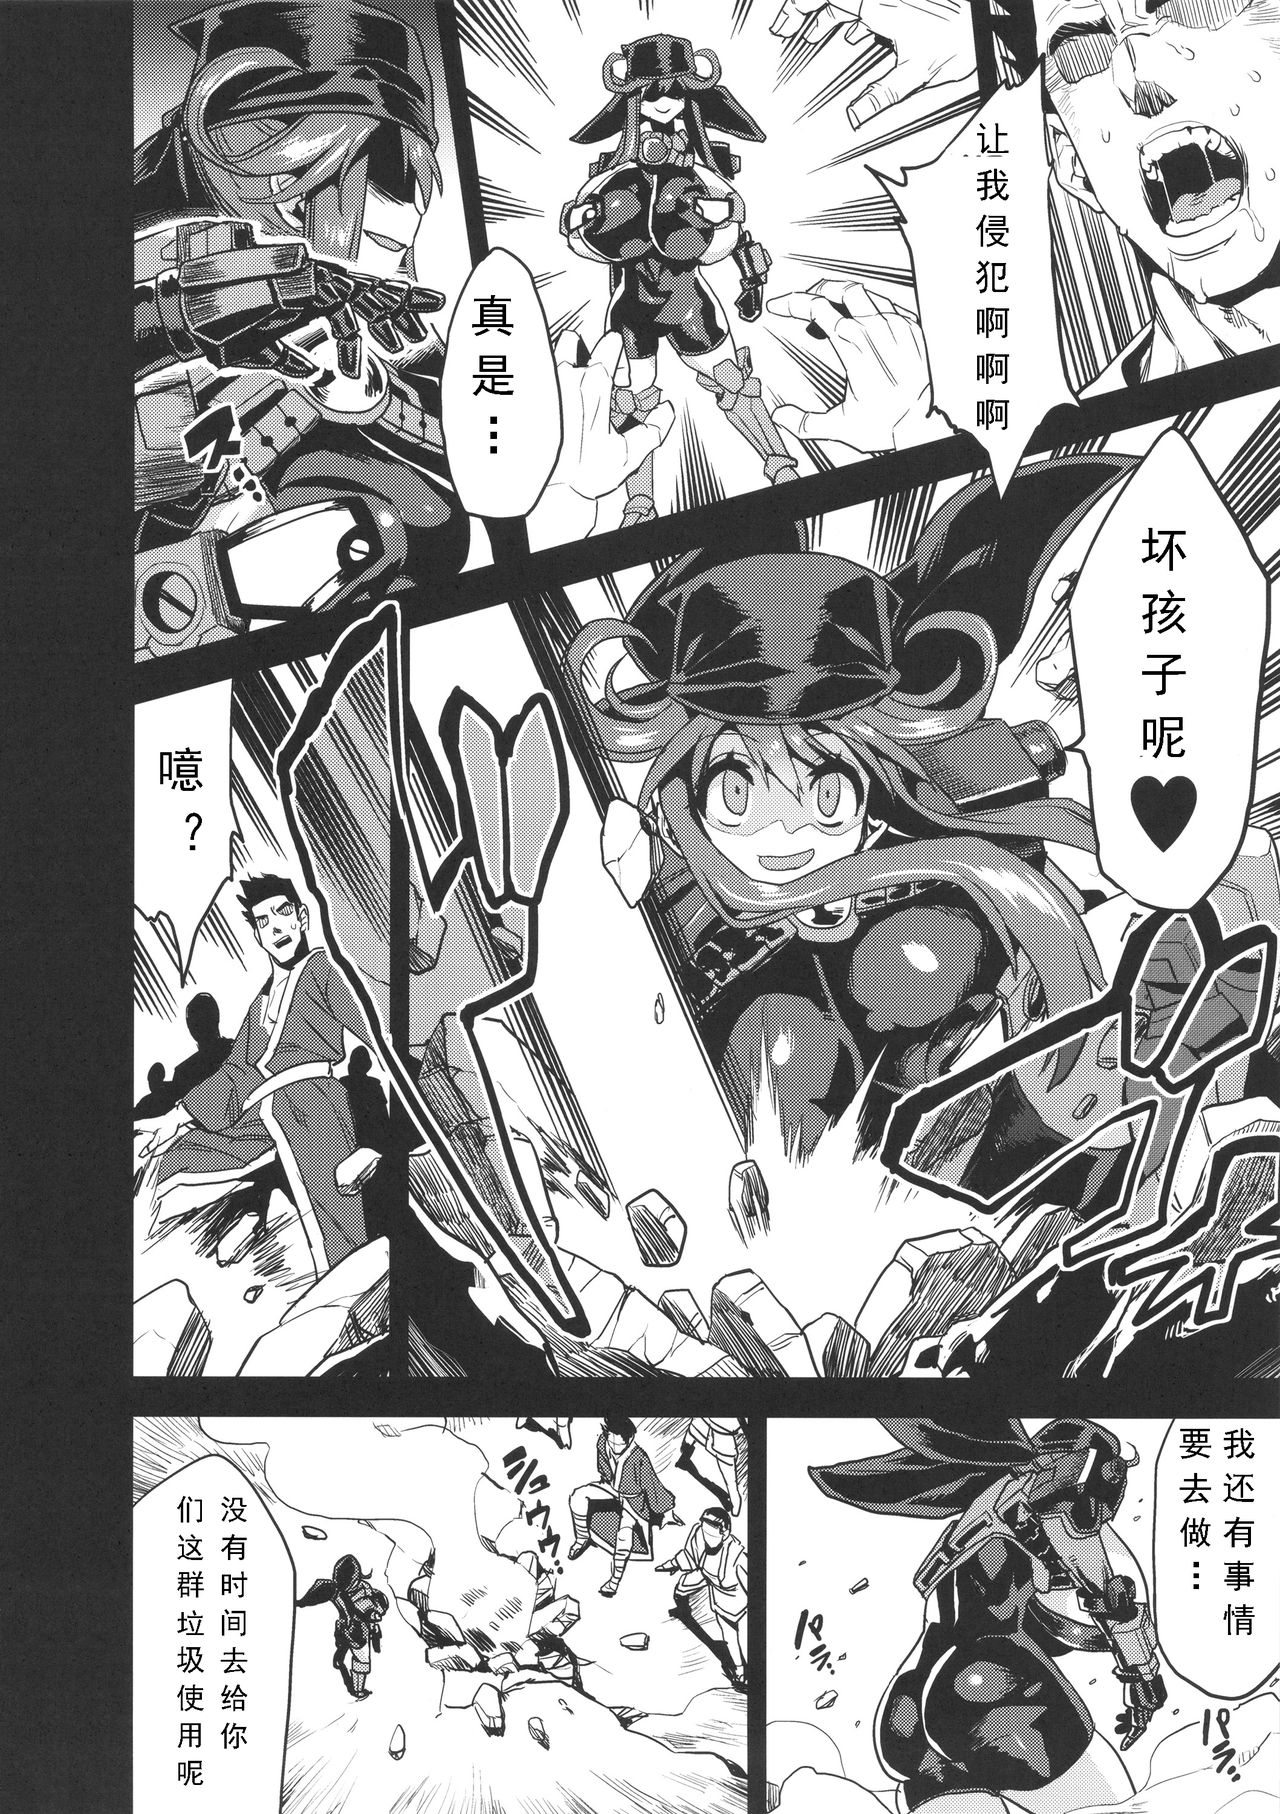 (C89) [OVing (Obui)] Hentai Marionette 4 (Saber Marionette J) [Chinese] [可乐个人汉化] page 6 full